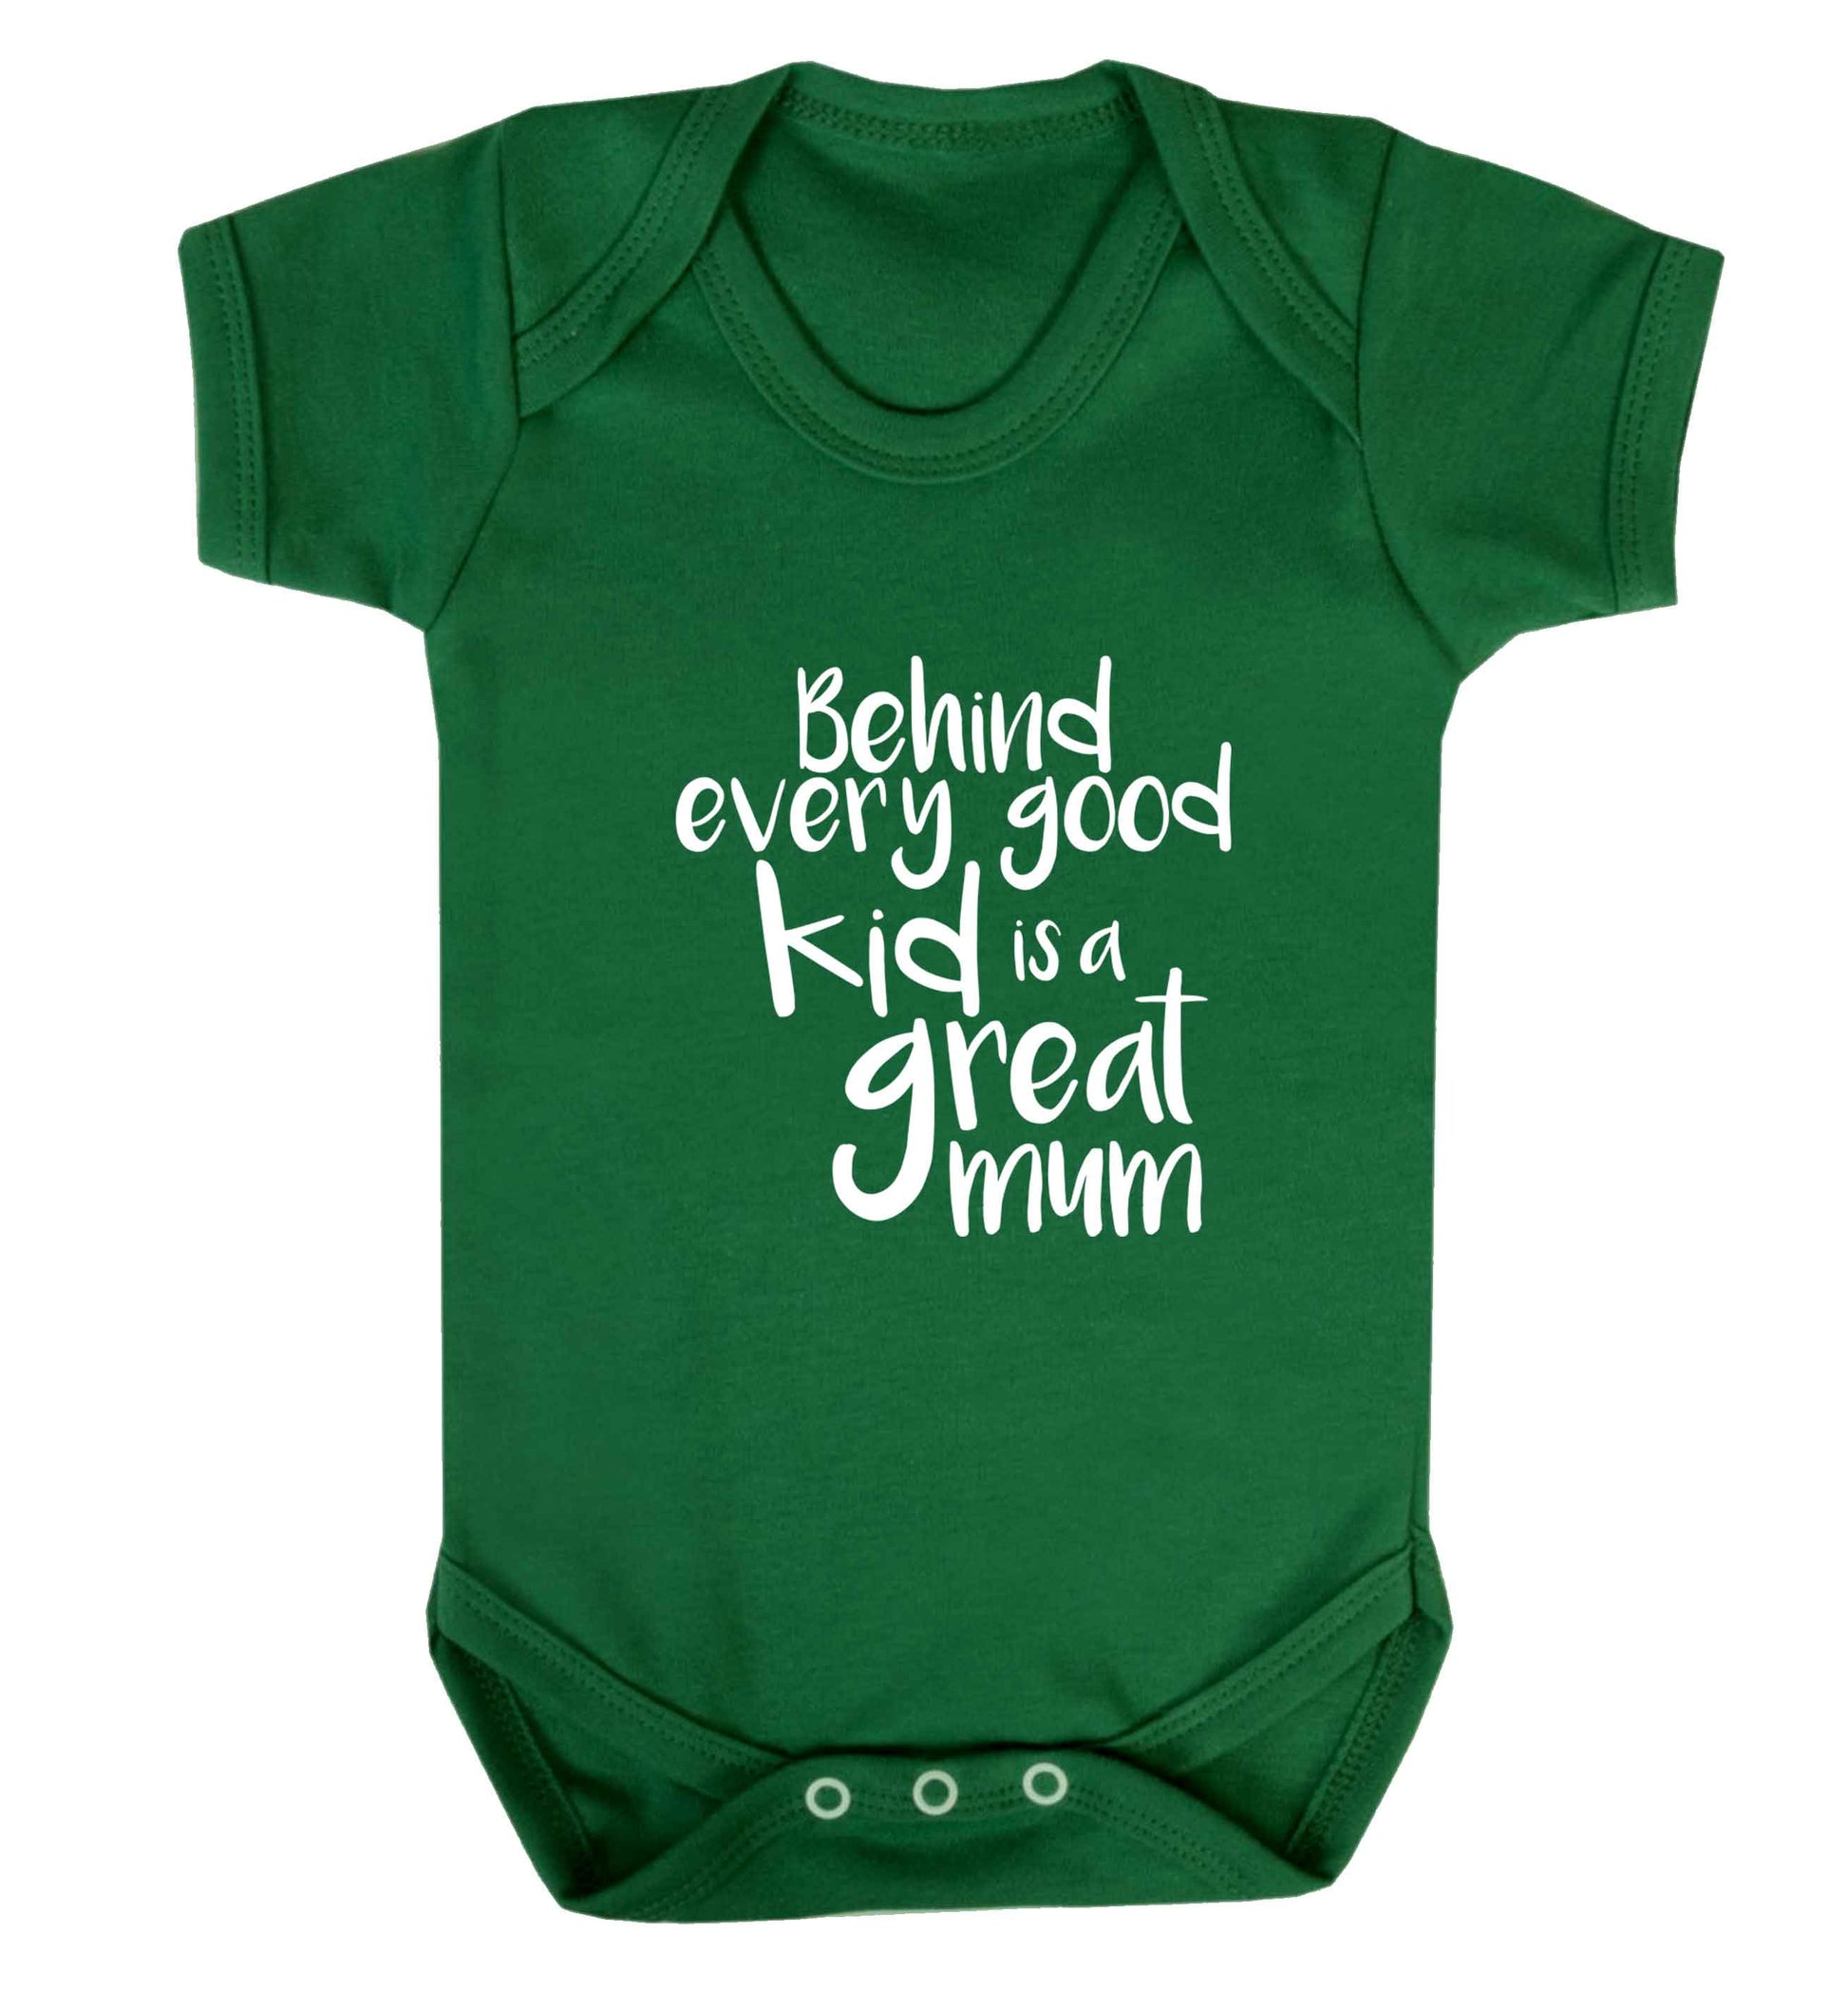 Behind every good kid is a great mum baby vest green 18-24 months